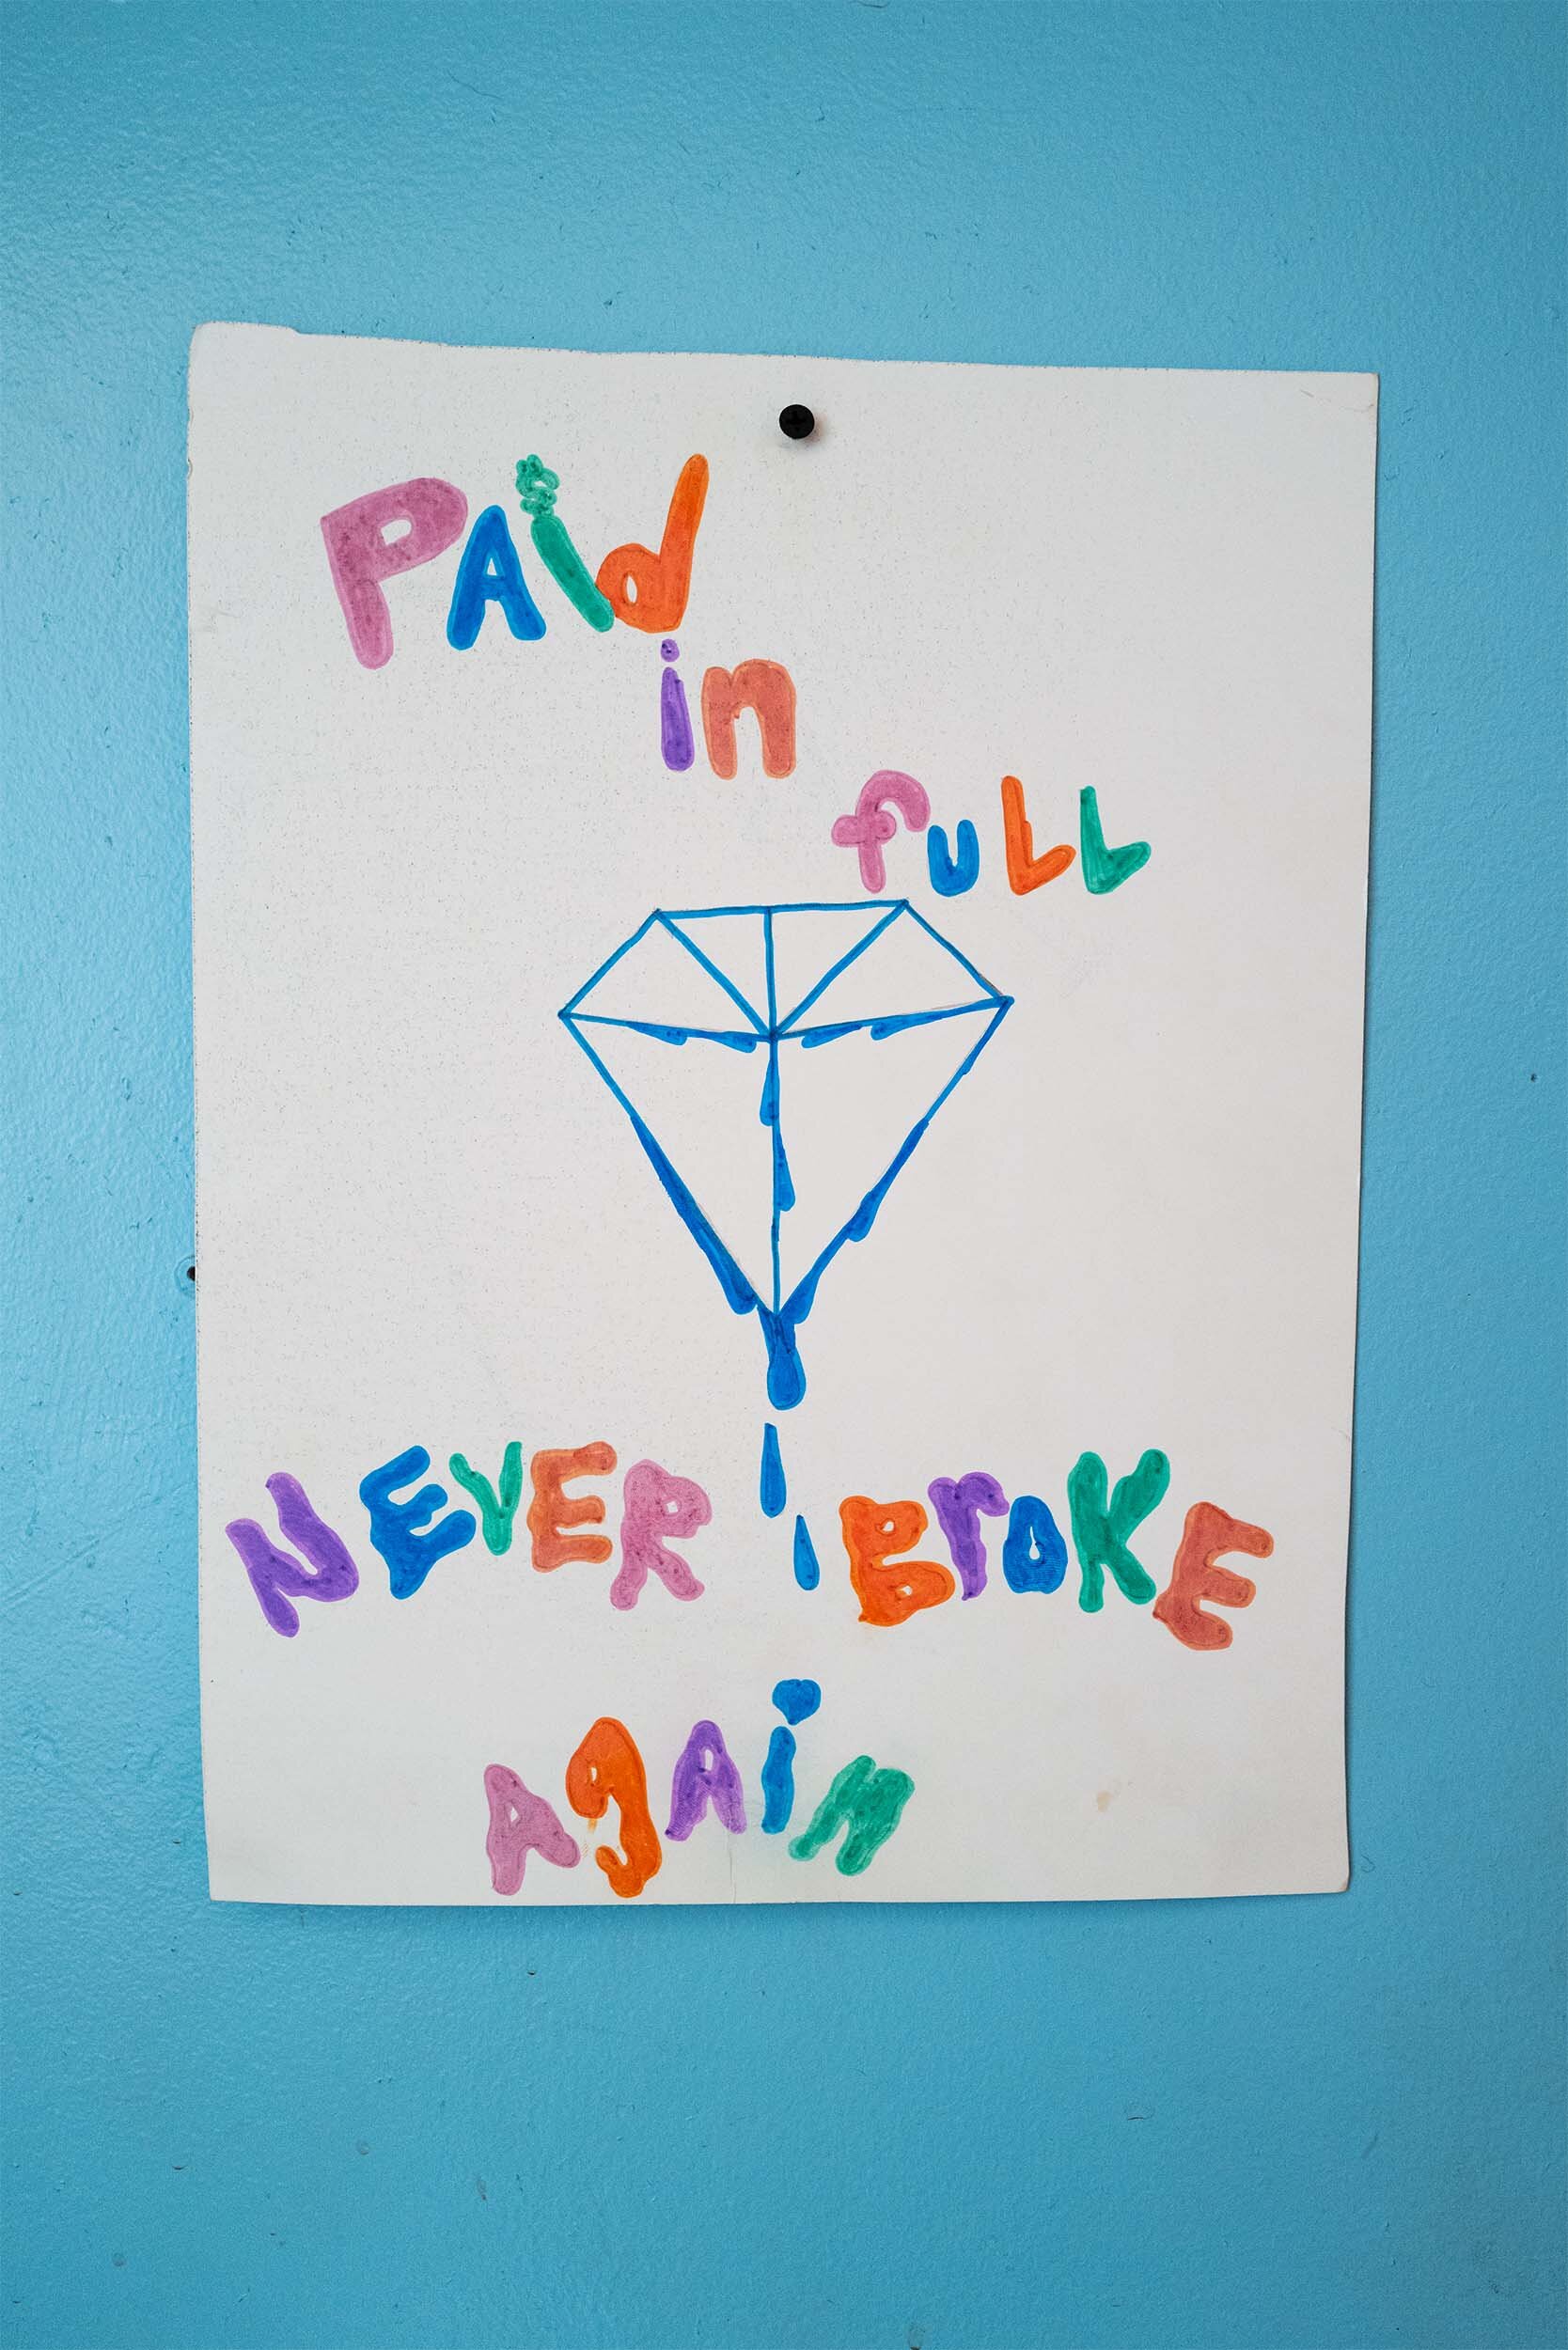  A drawing that Reuben made at his Intensive Outpatient treatment (IOP) hangs on the wall in his room. 